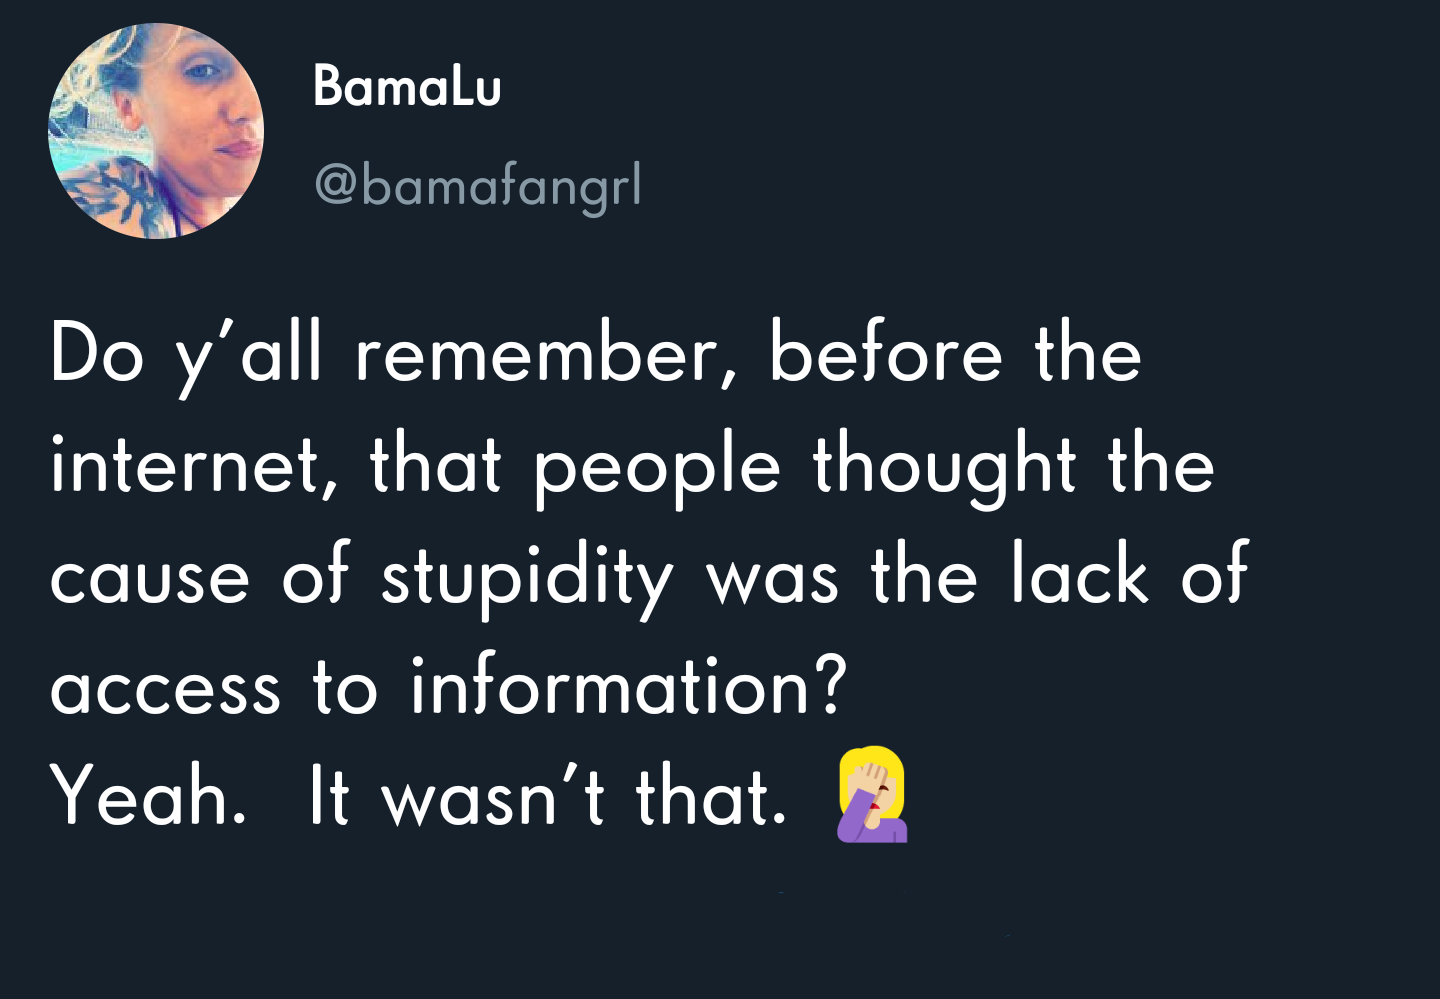 Bamalu | Do y'all remember, before the internet, that people thought the cause of stupidity was the lack of access to information? Yeah. It wasn't that.